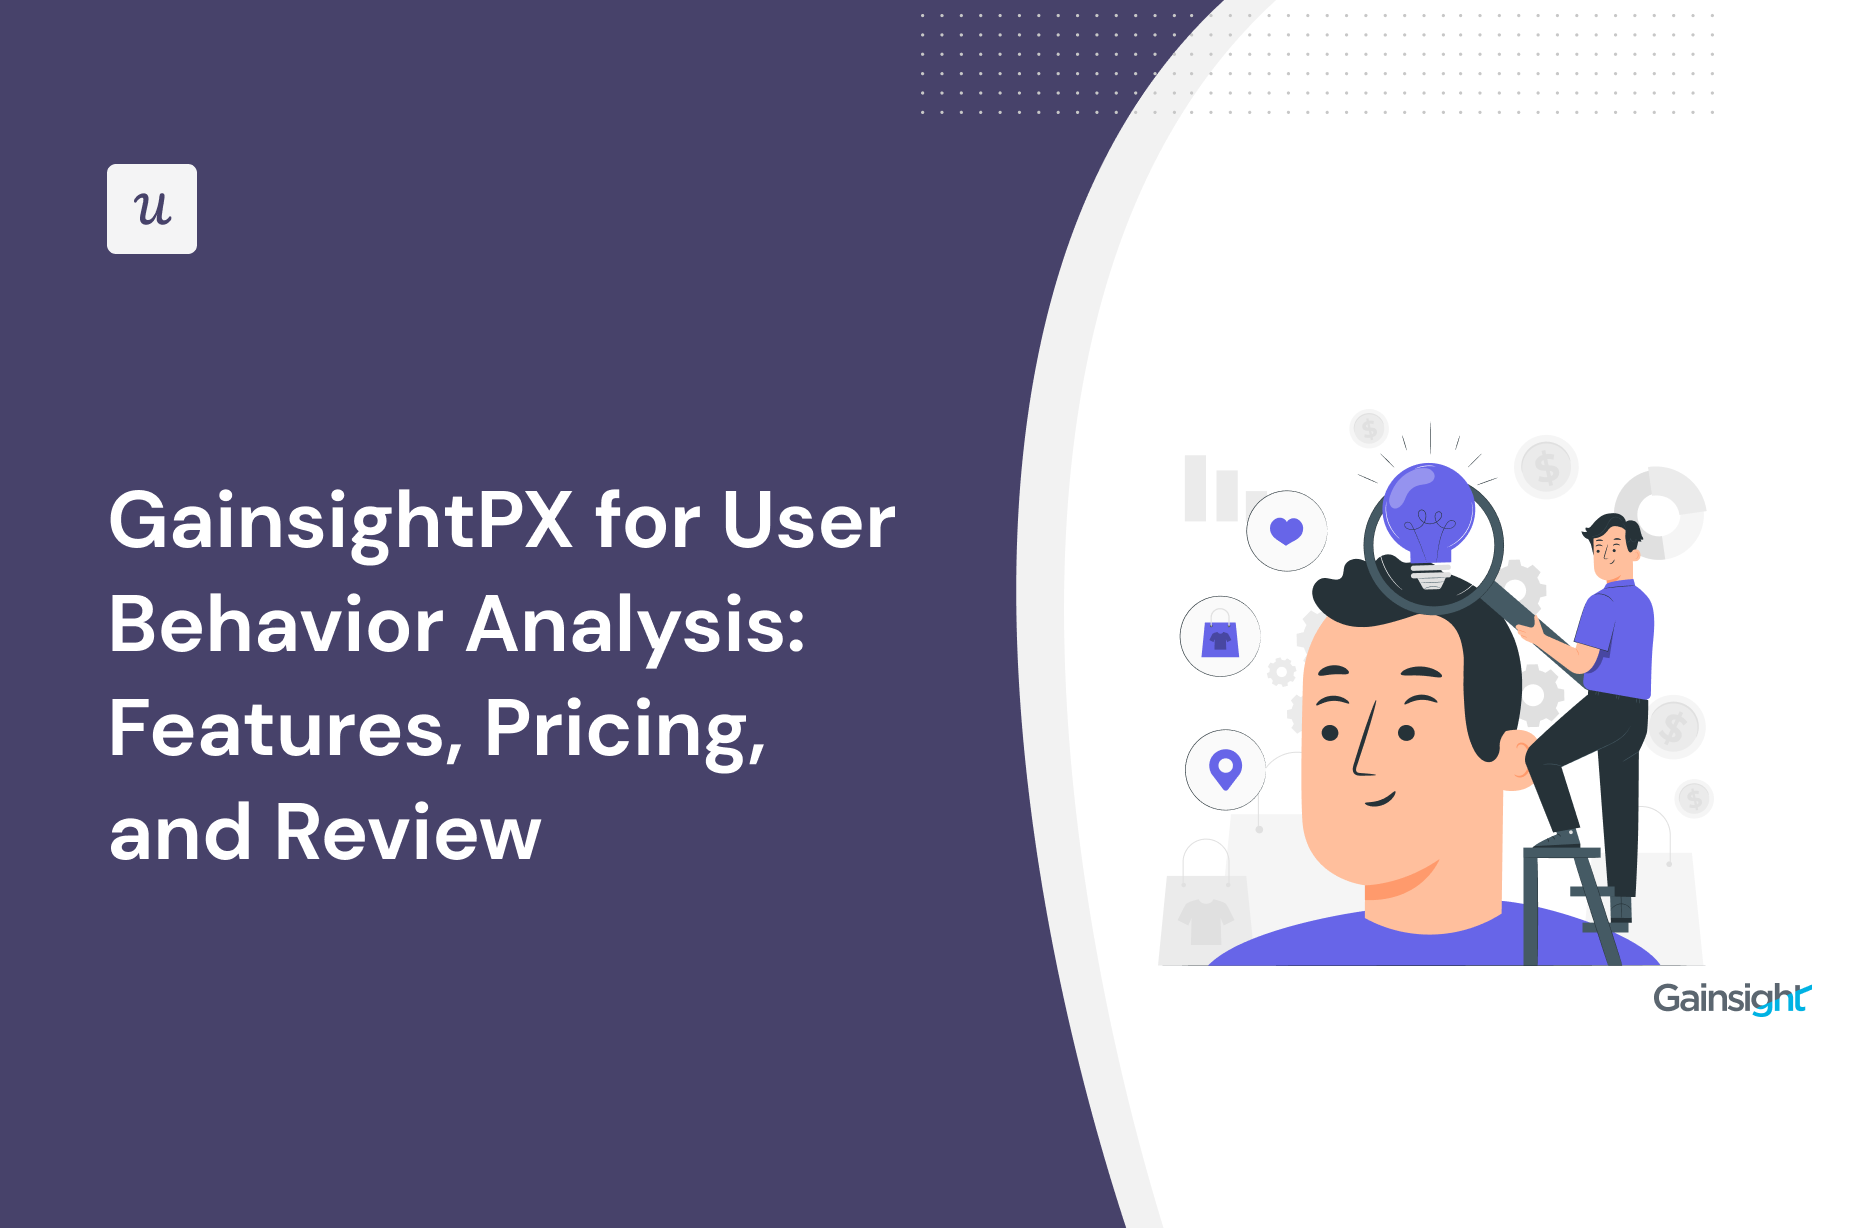 GainsightPX for User Behavior Analysis: Features, Pricing, and Review